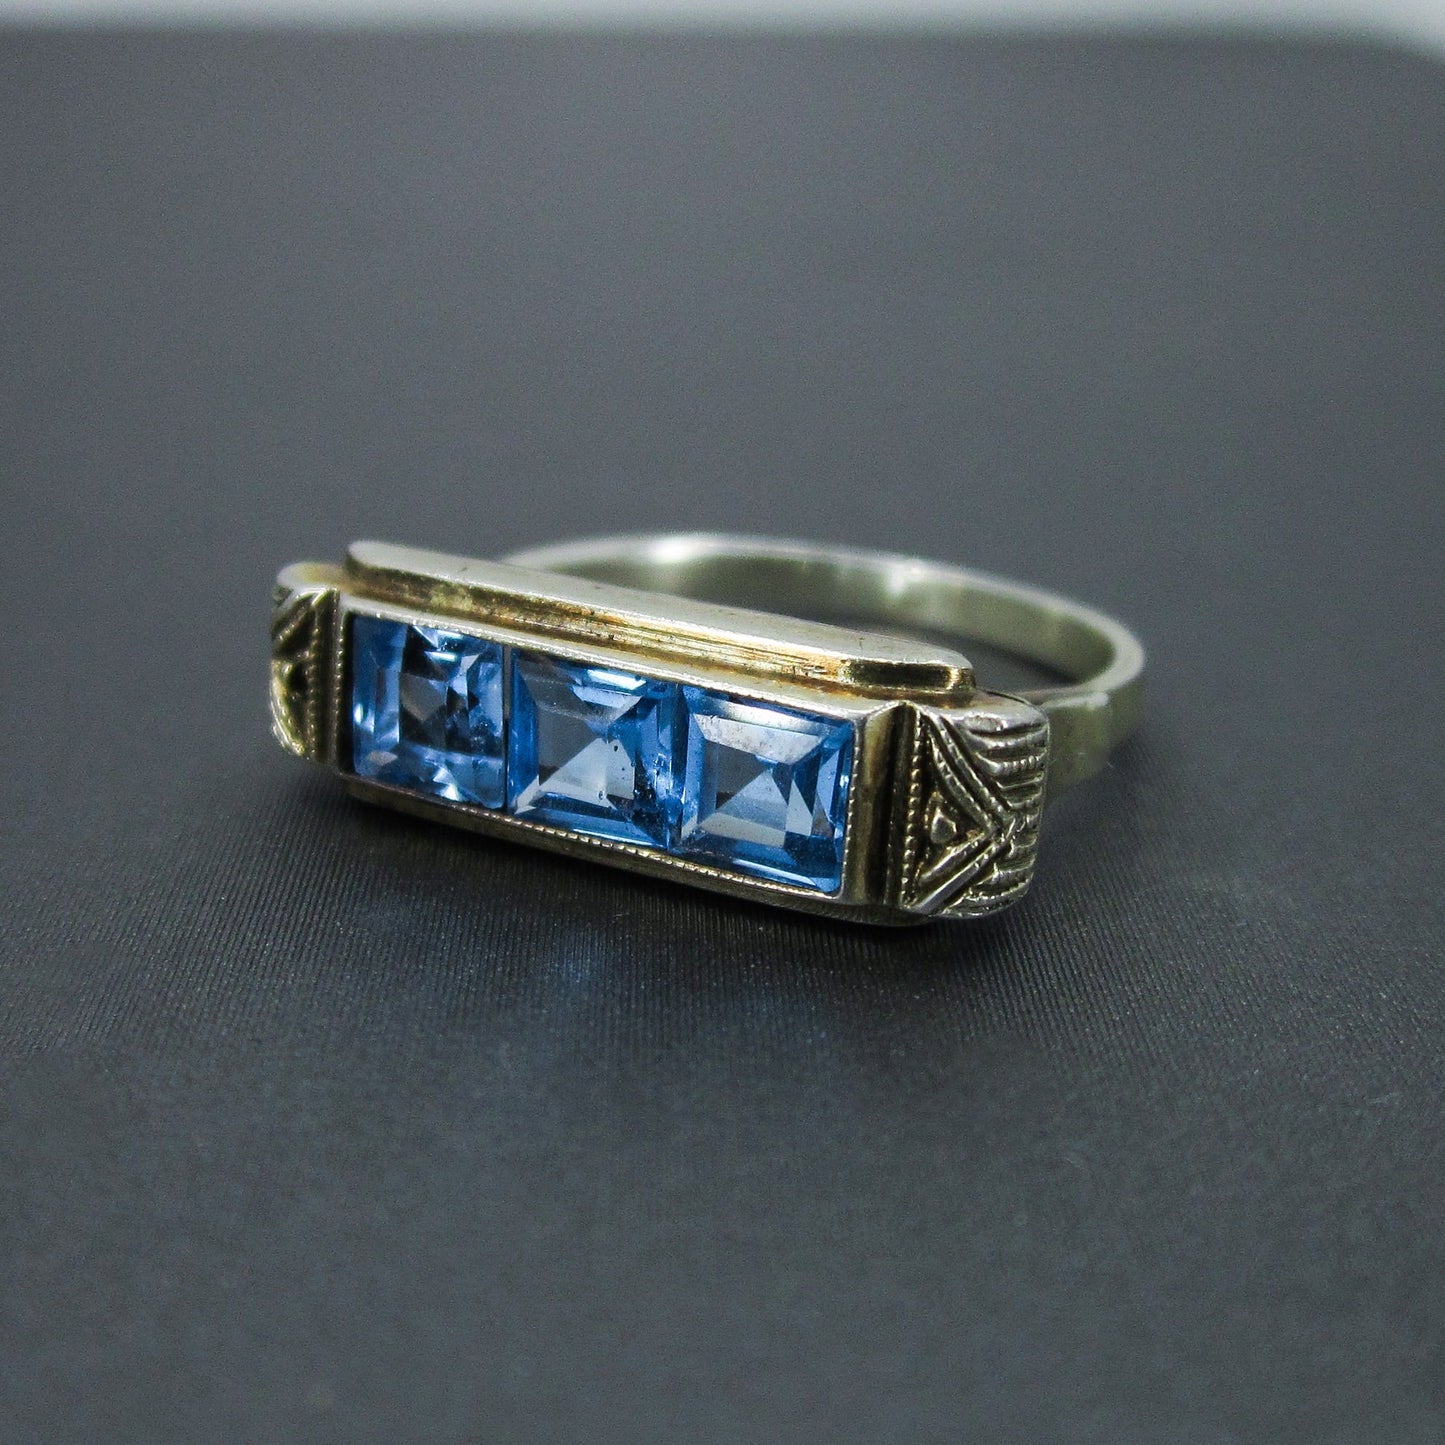 SOLD-Art Deco Square Cut Synthetic Spinel Ring Gilt 835 Silver c. 1930